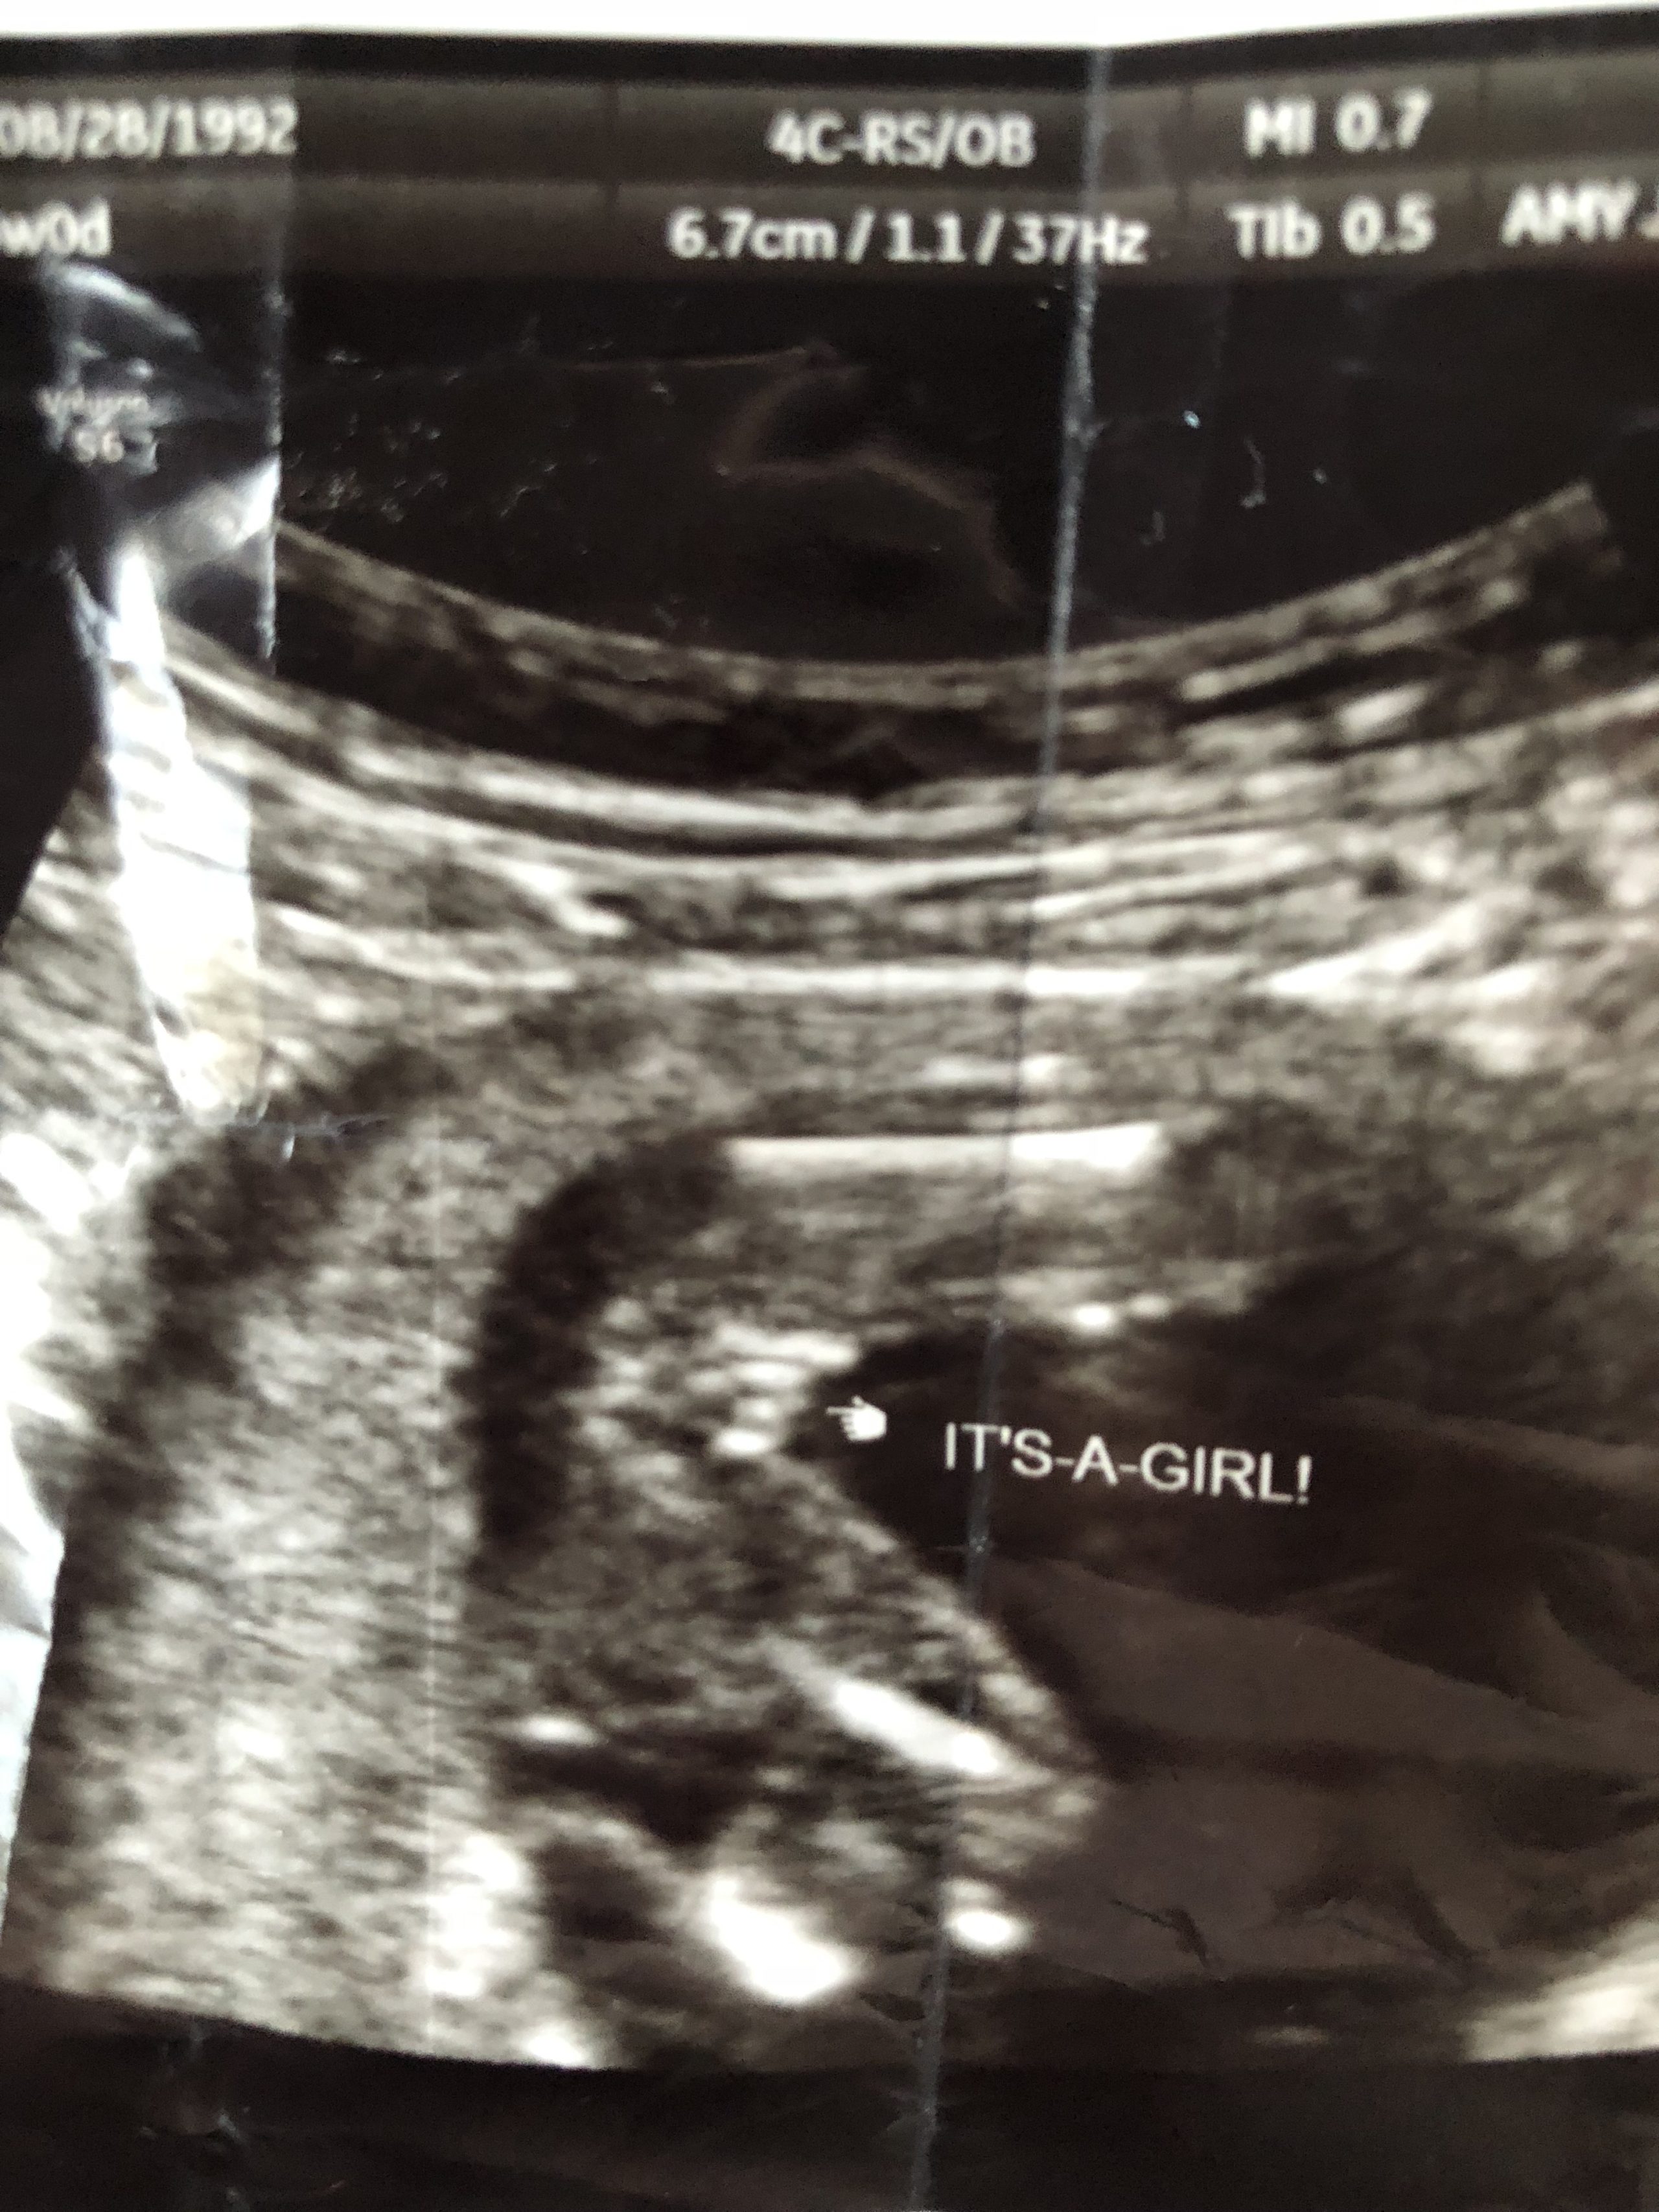 Boy or Girl Ultrasound Wrong? Gender Scan Accuracy